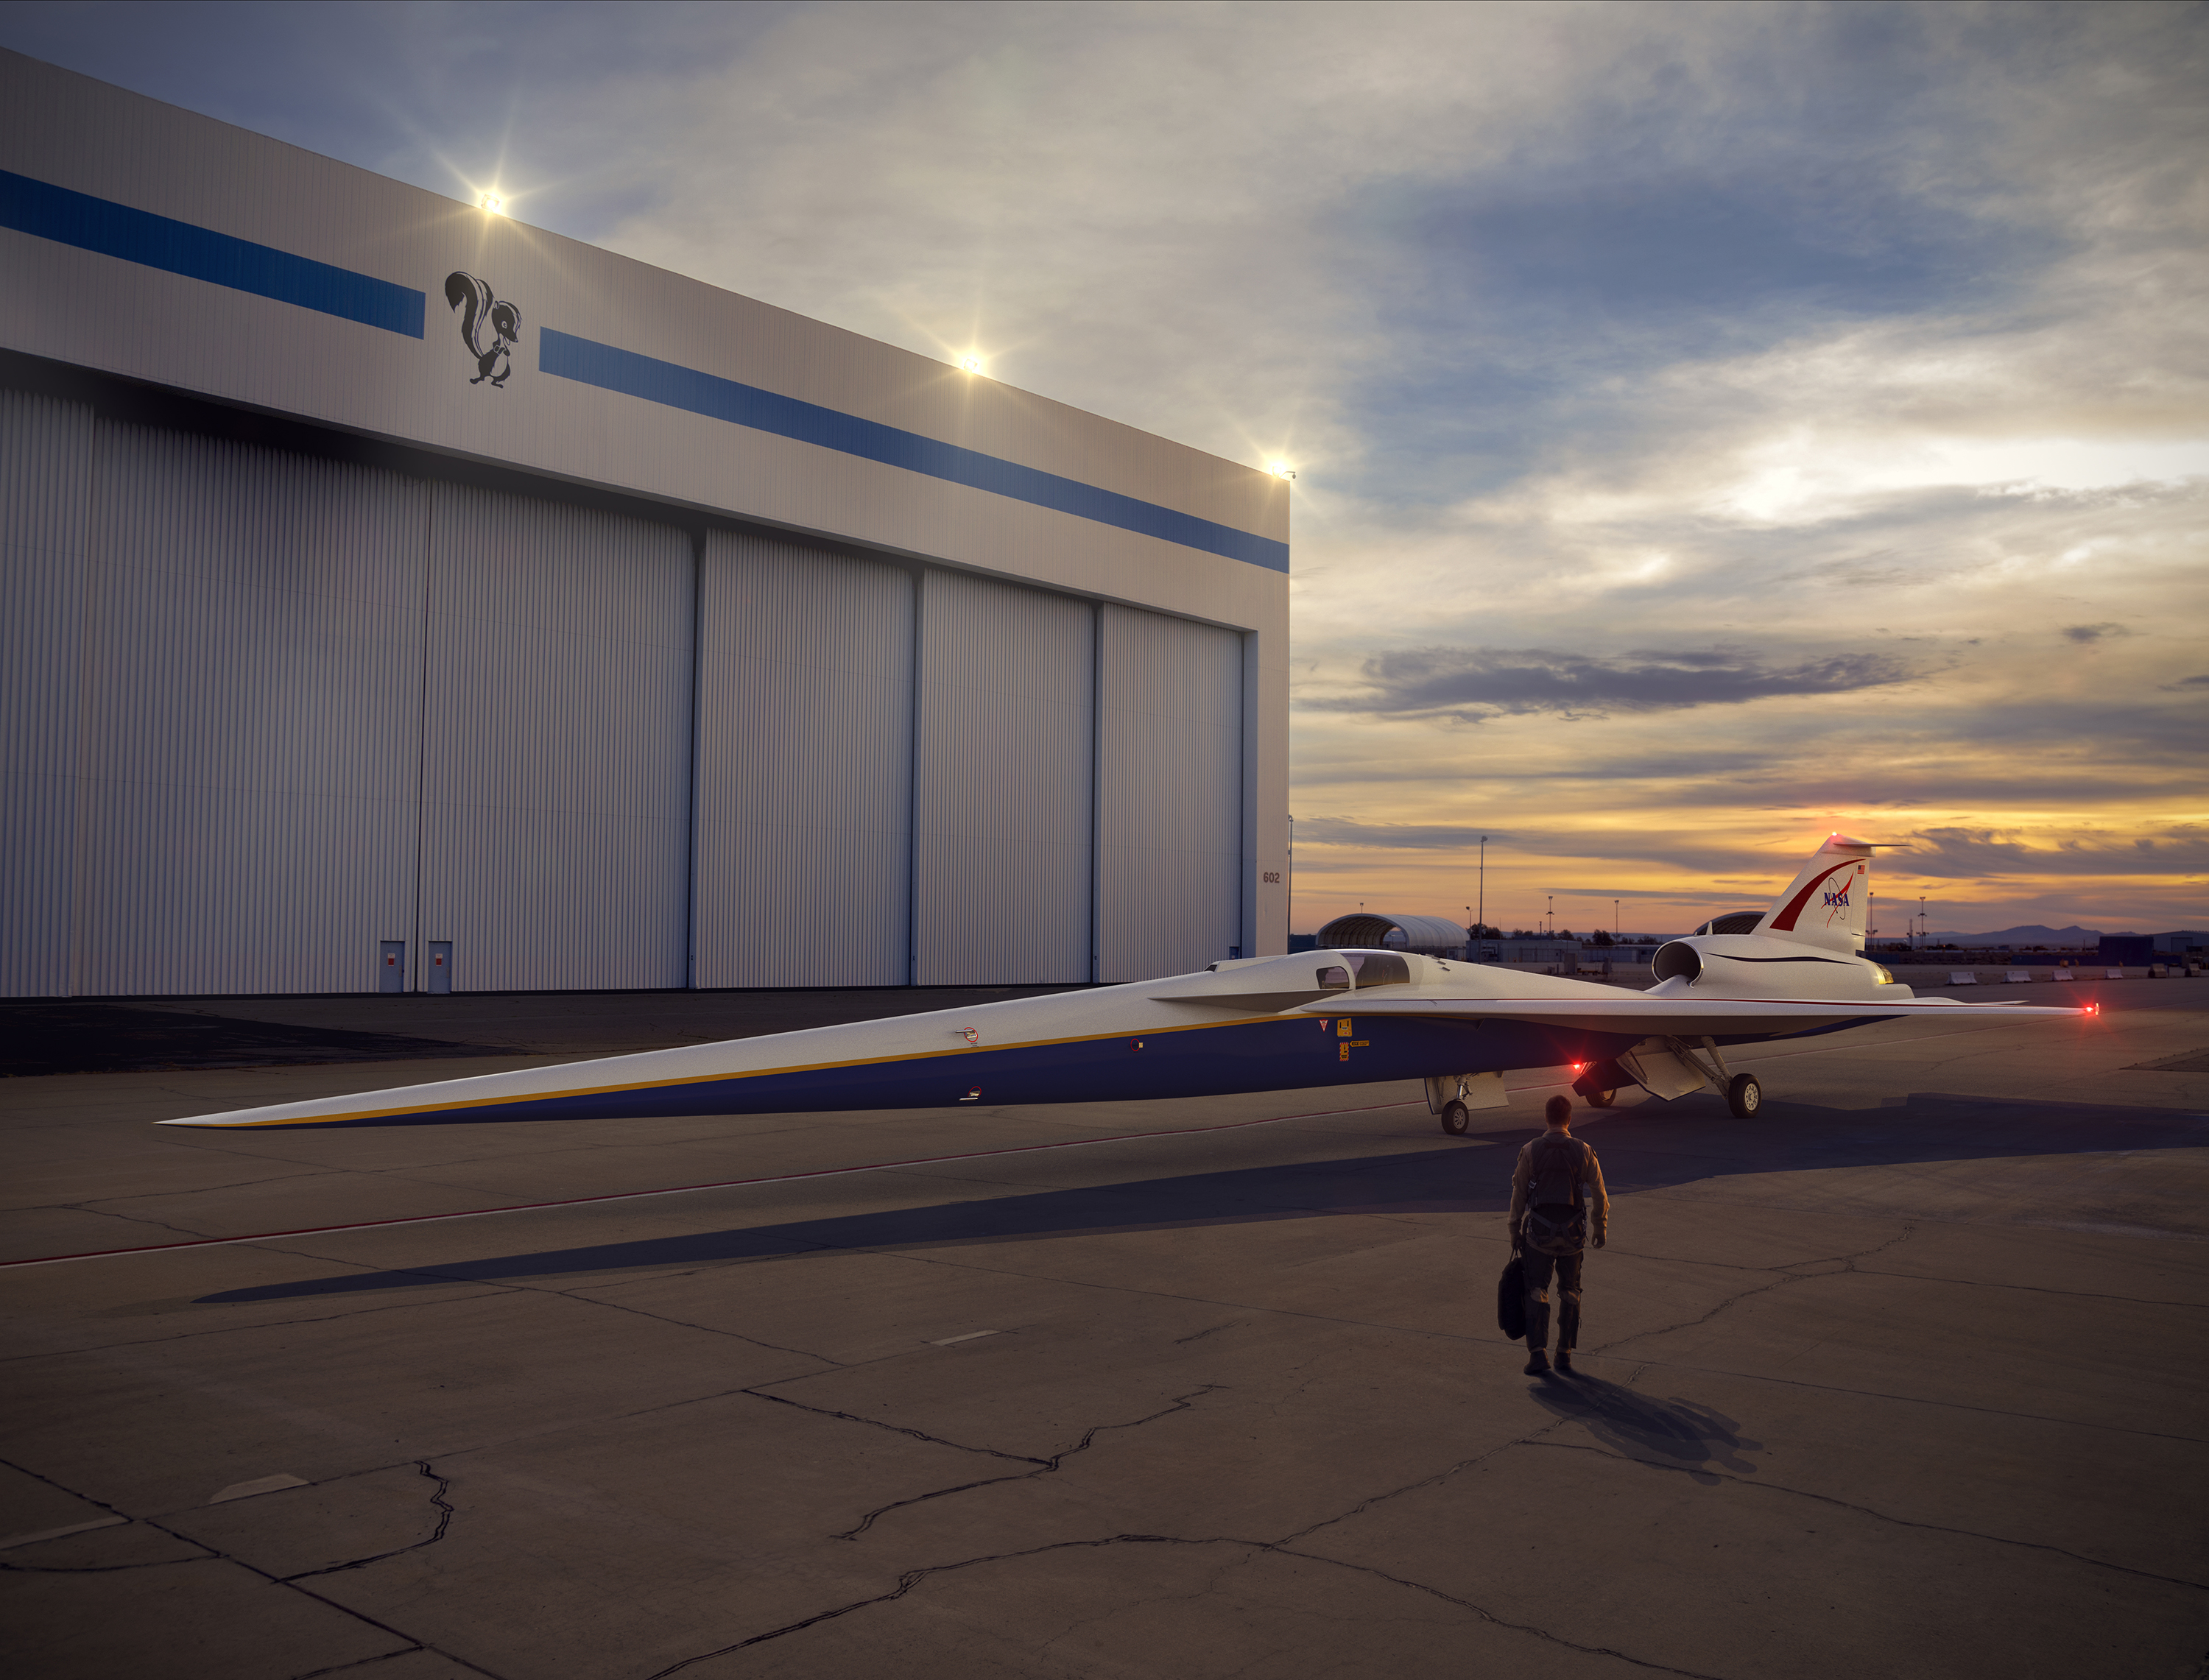 Artist's illustration of the X-59 parked near a hangar with a pilot walking towards it at sunrise.